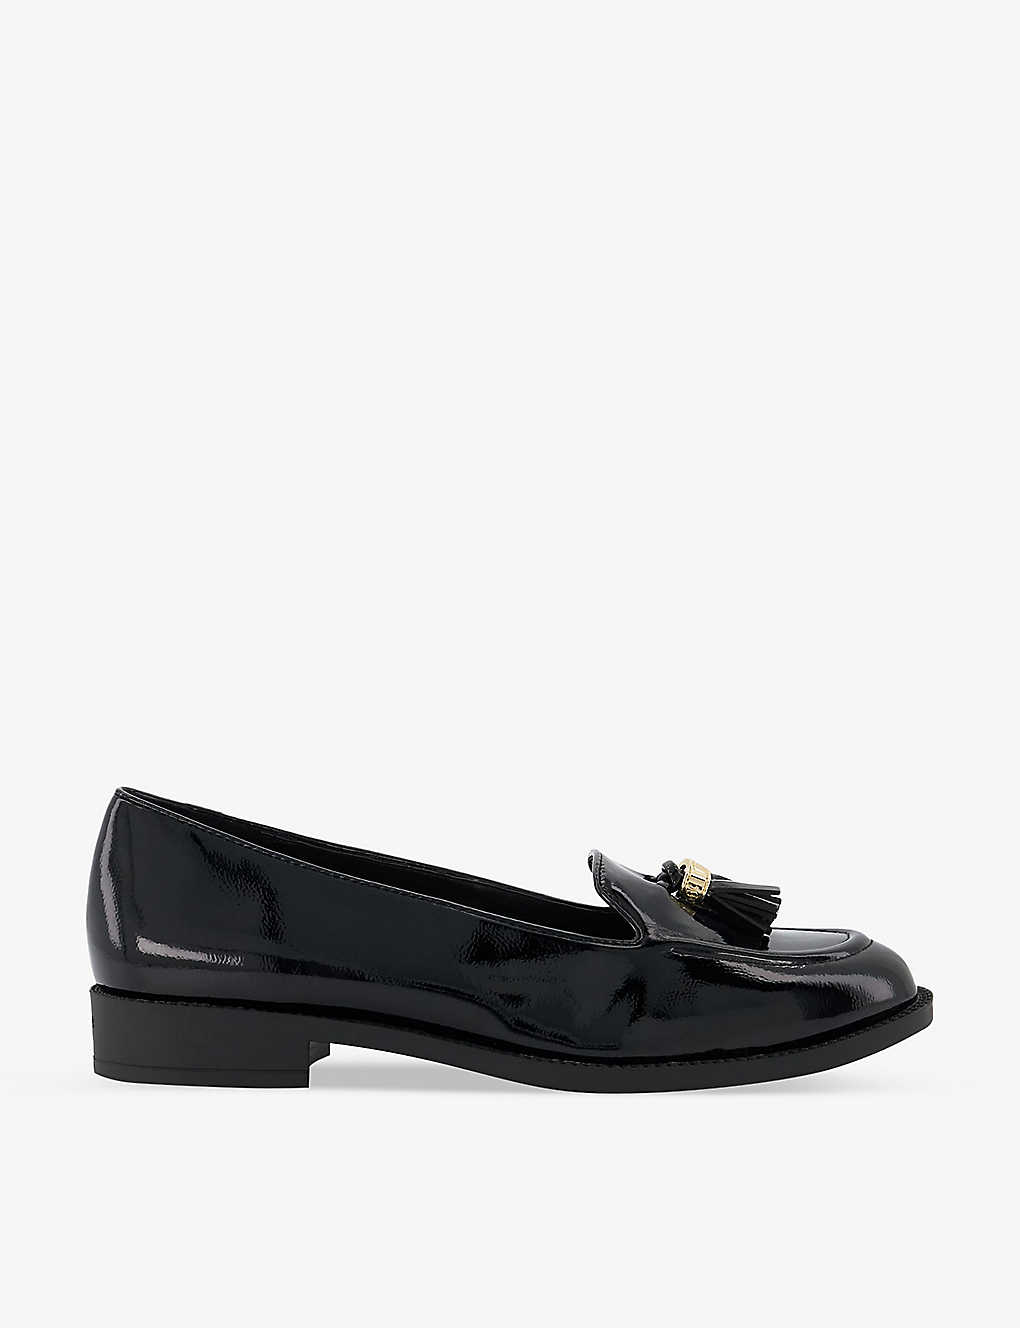 Dune Womens Black-patent Synthetic Global Tassel-embellished Patent Faux-leather Loafers